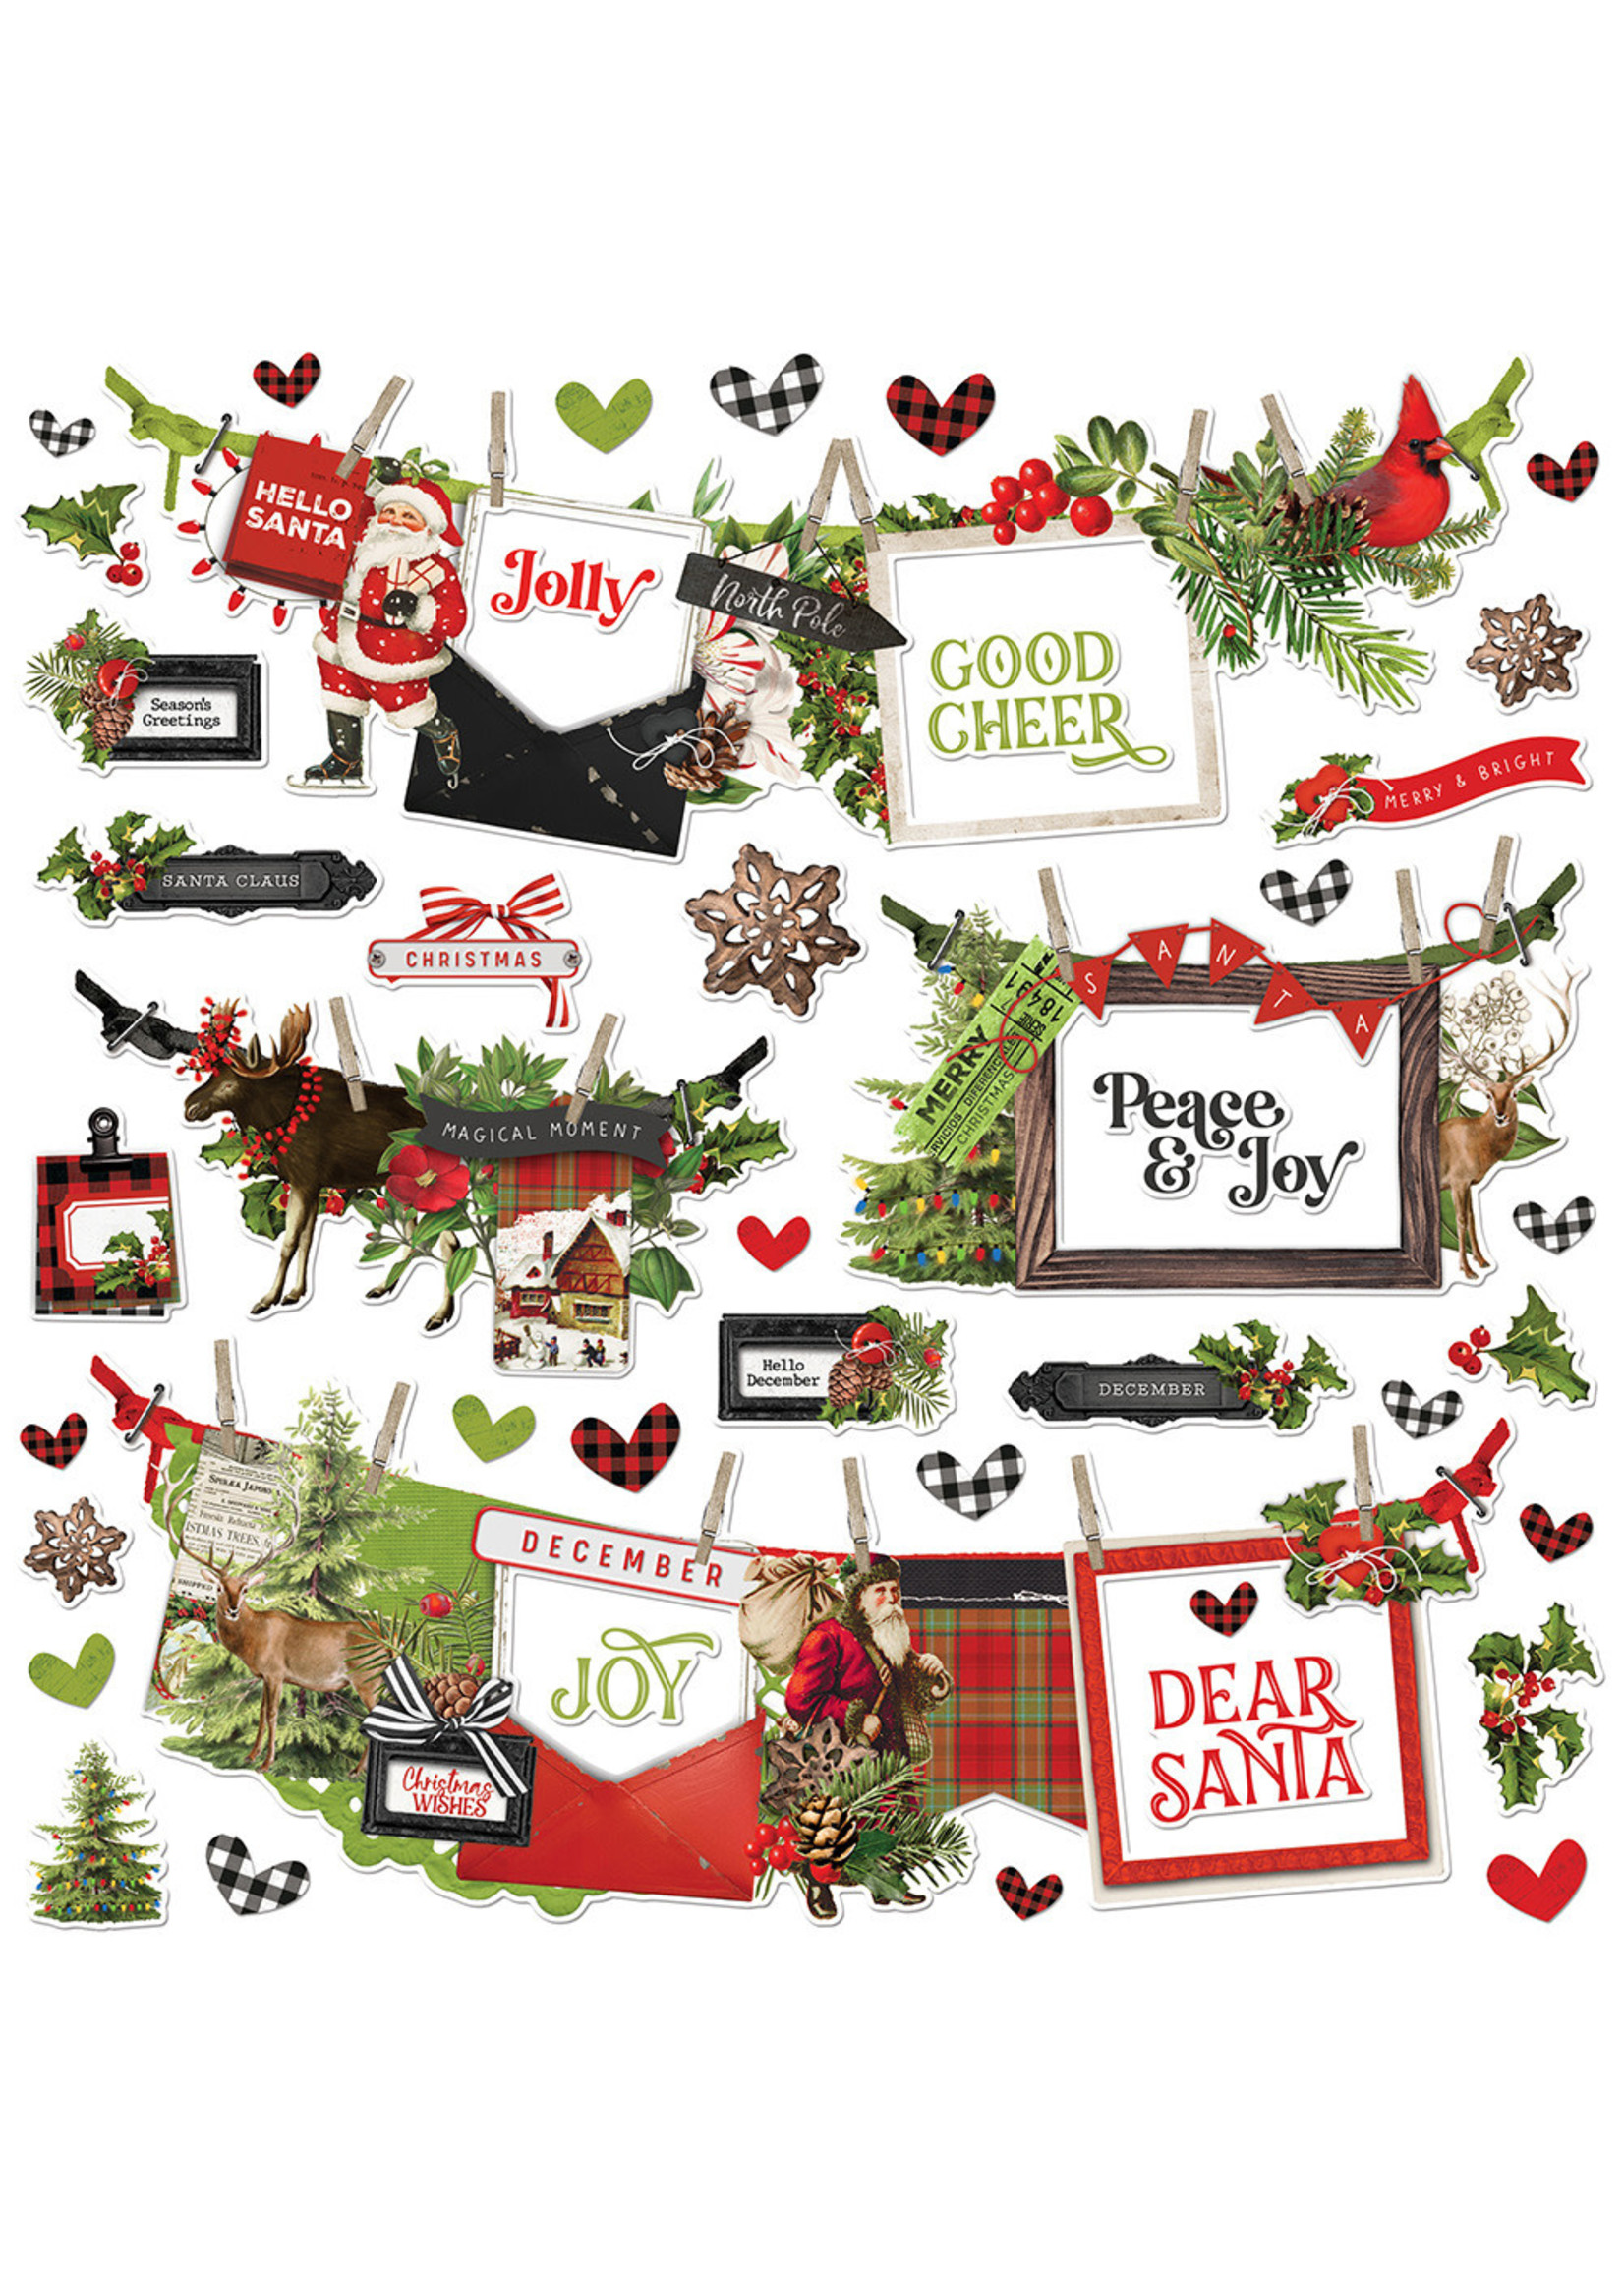 SIMPLE STORIES Simple Vintage Christmas Lodge, 12x12 Banner Stickers